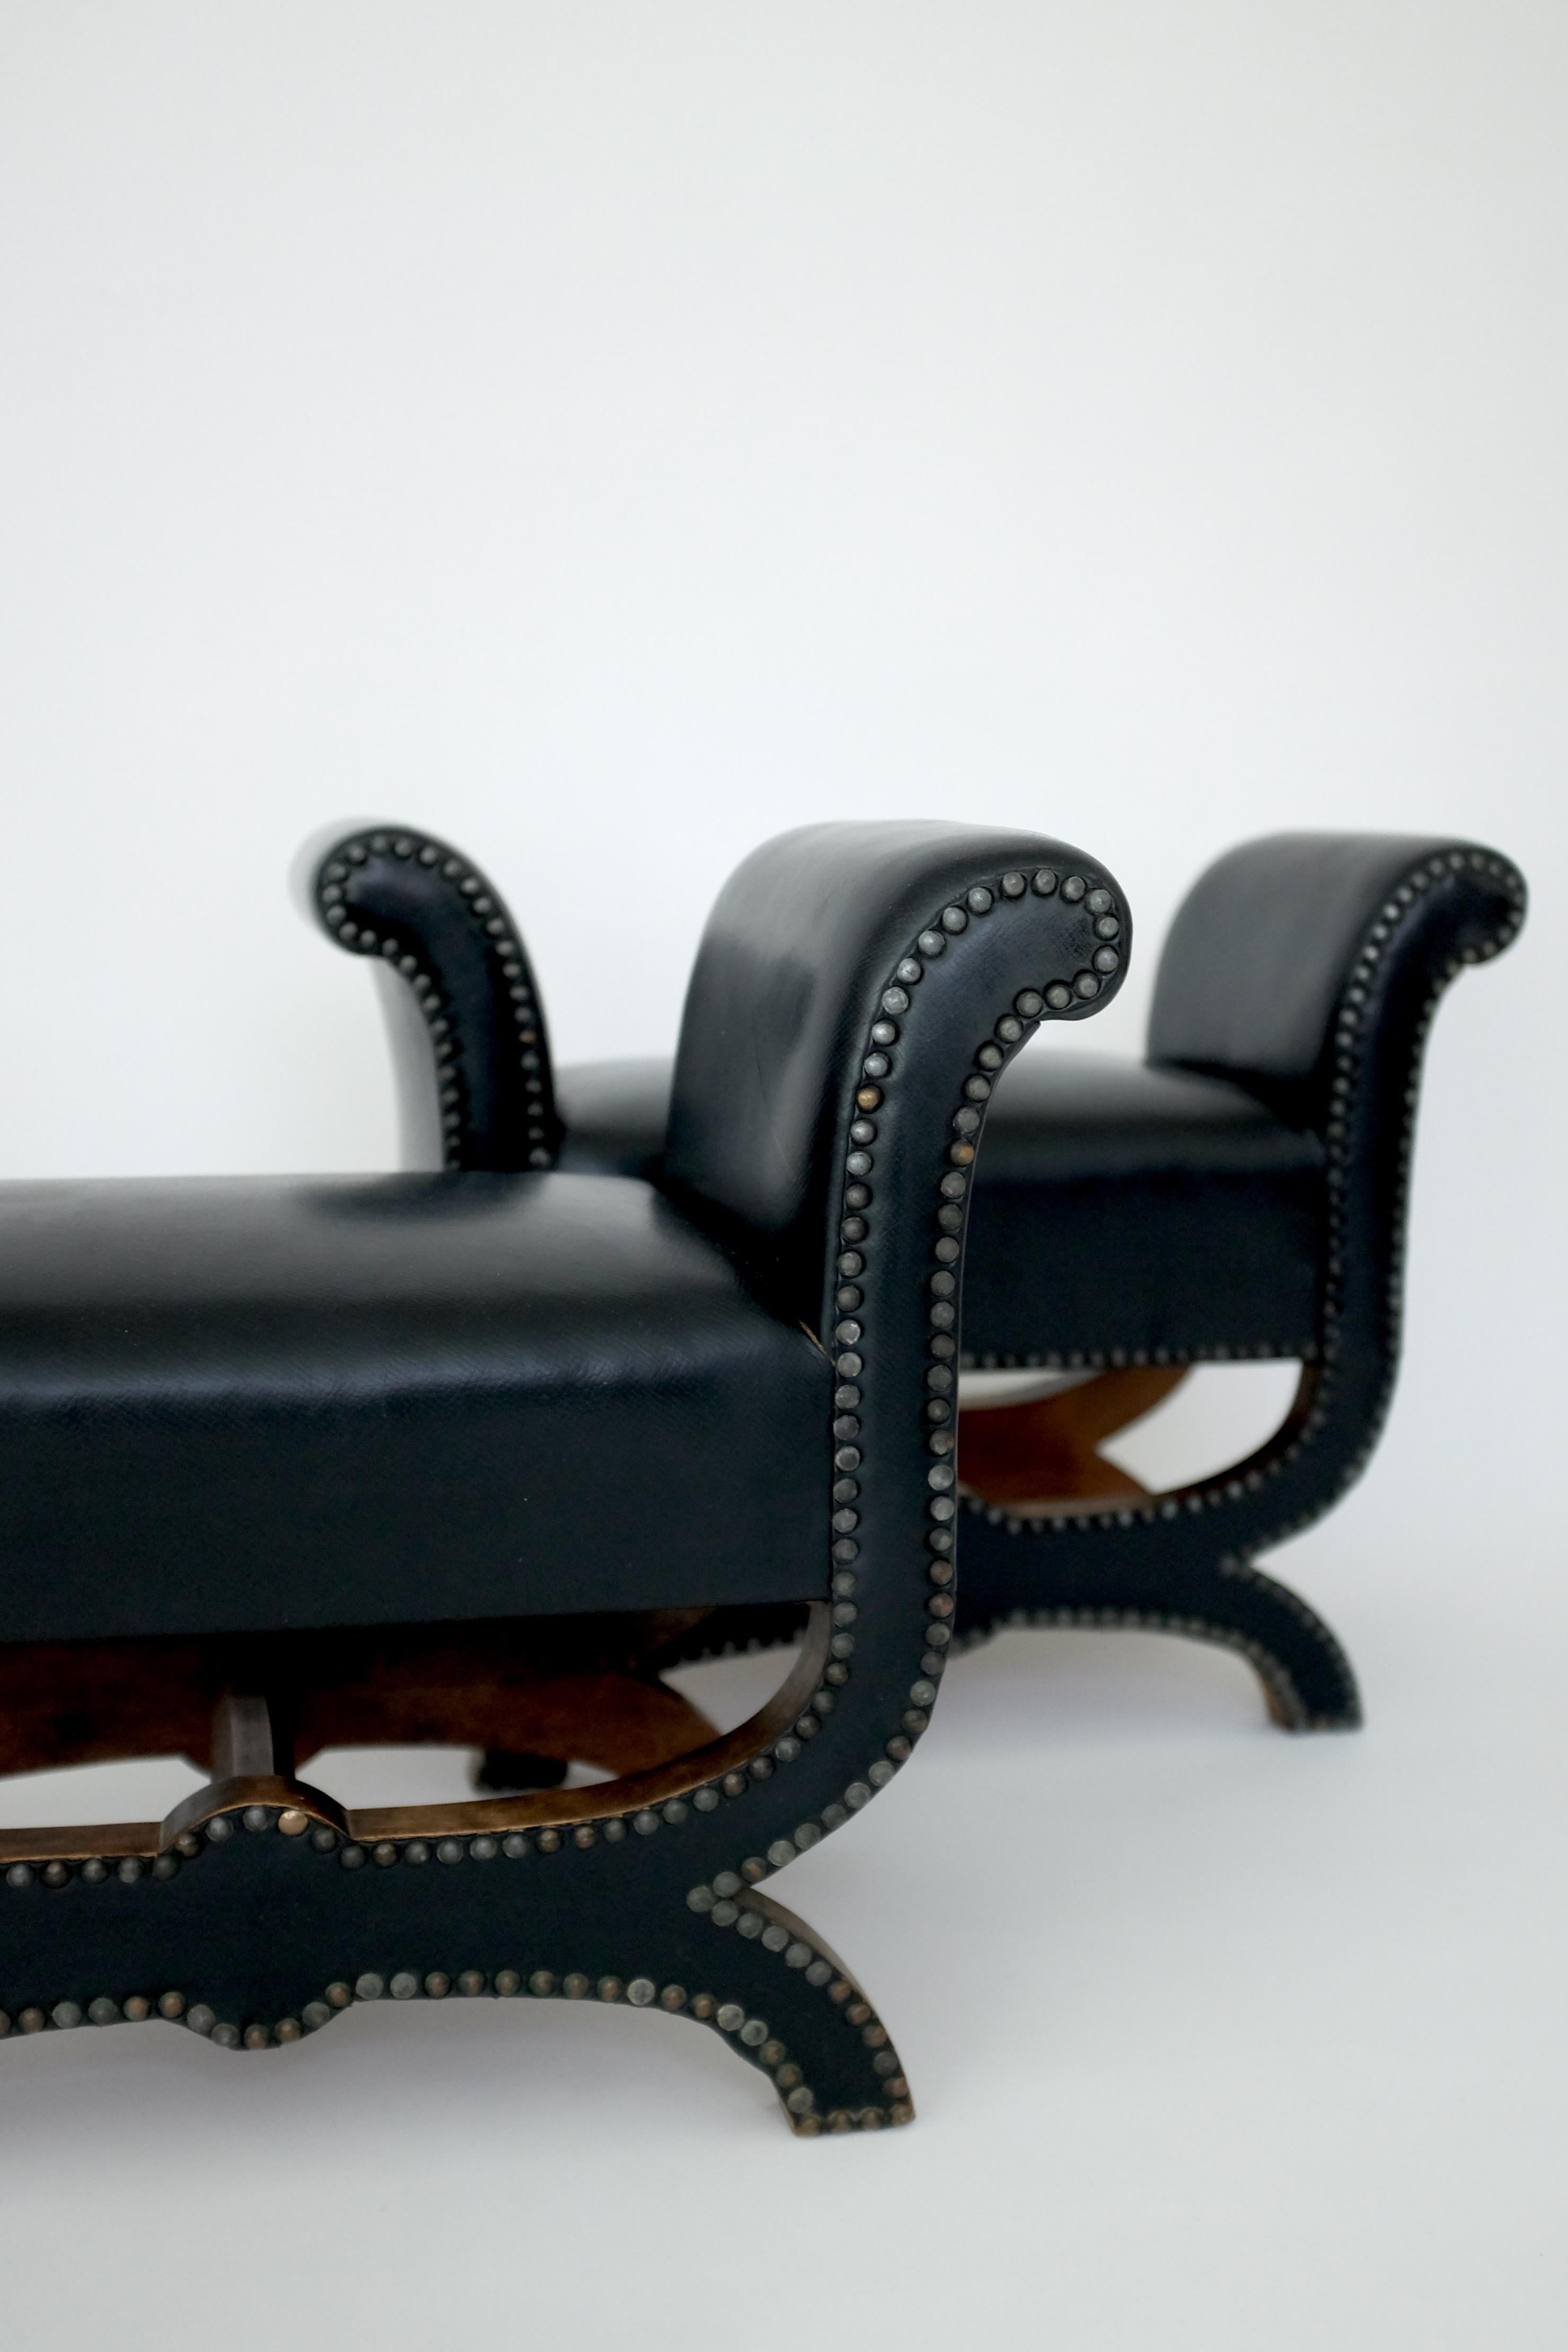 Scandinavian Modern 1930's, Pair of Footstools by Otto Schultz For Sale